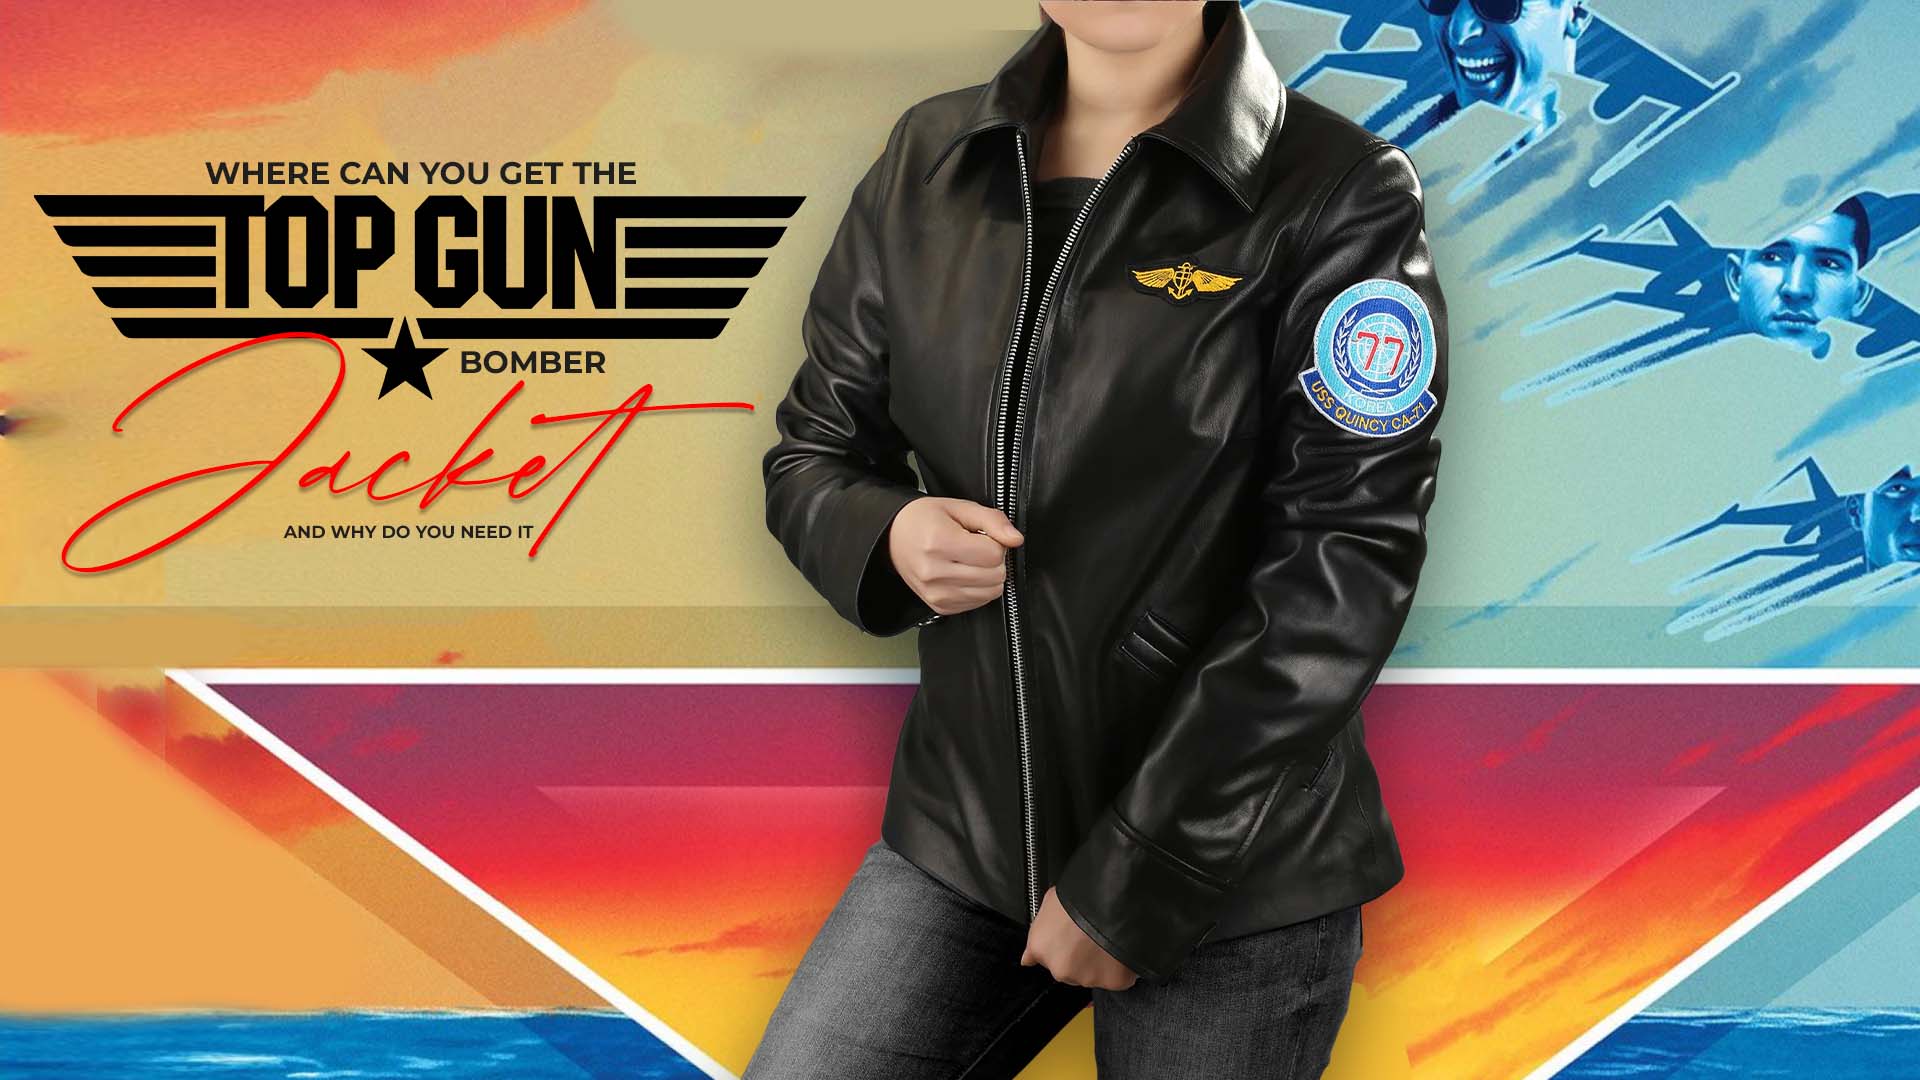 Where Can You Get The Top Gun Bomber Jacket And Why Do You Need It?